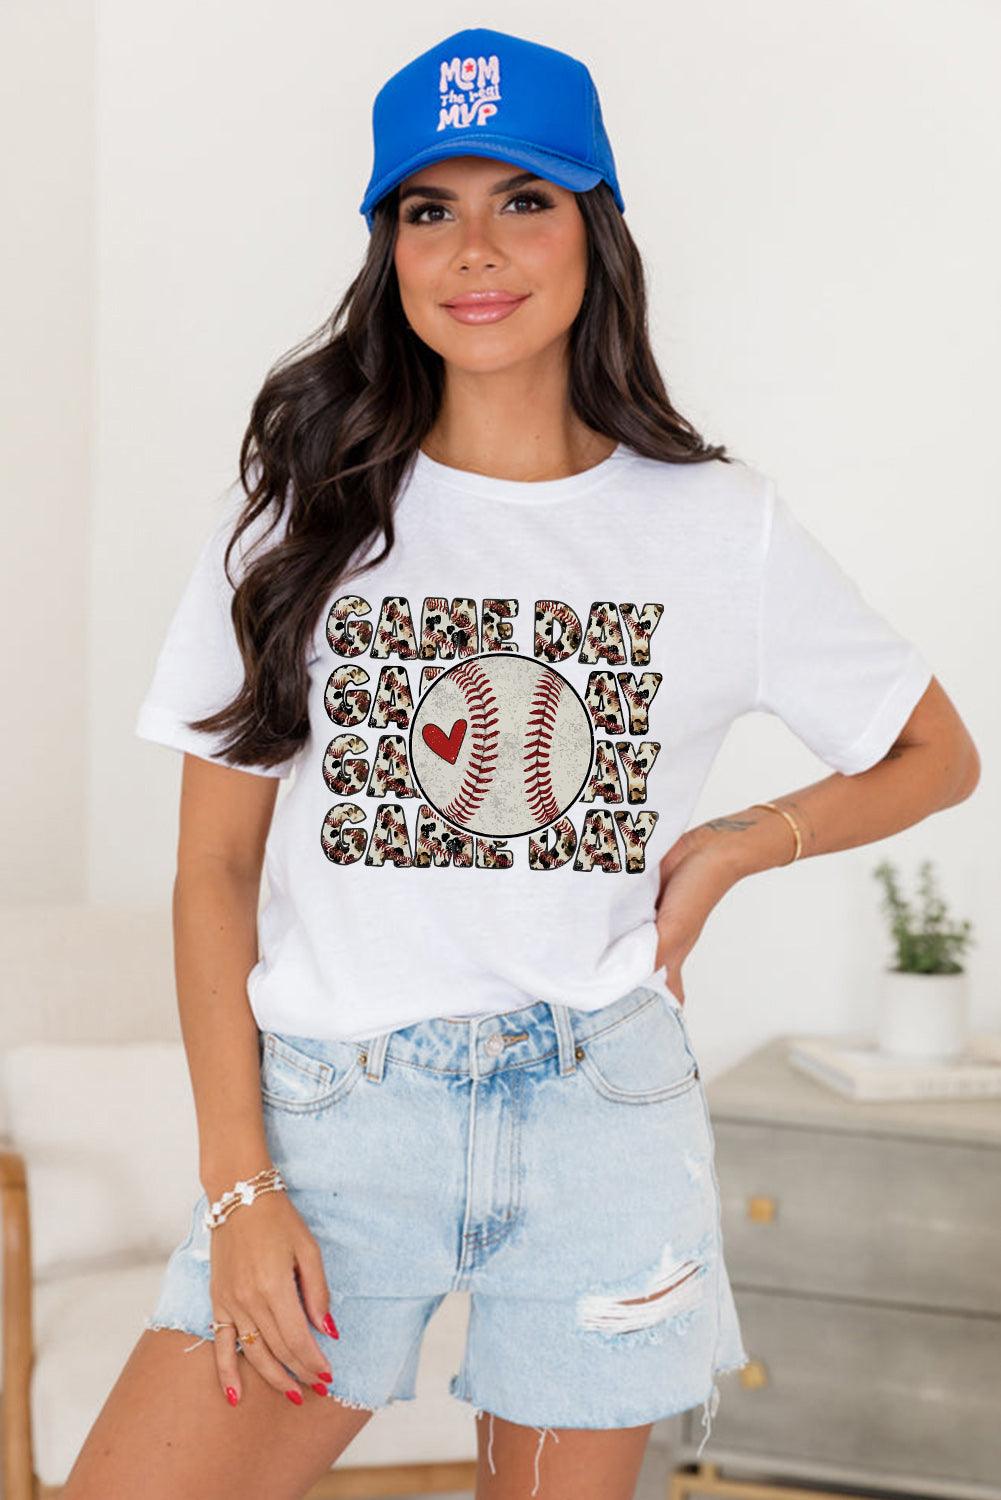 White Leopard GAME DAY Baseball Graphic T Shirt - L & M Kee, LLC